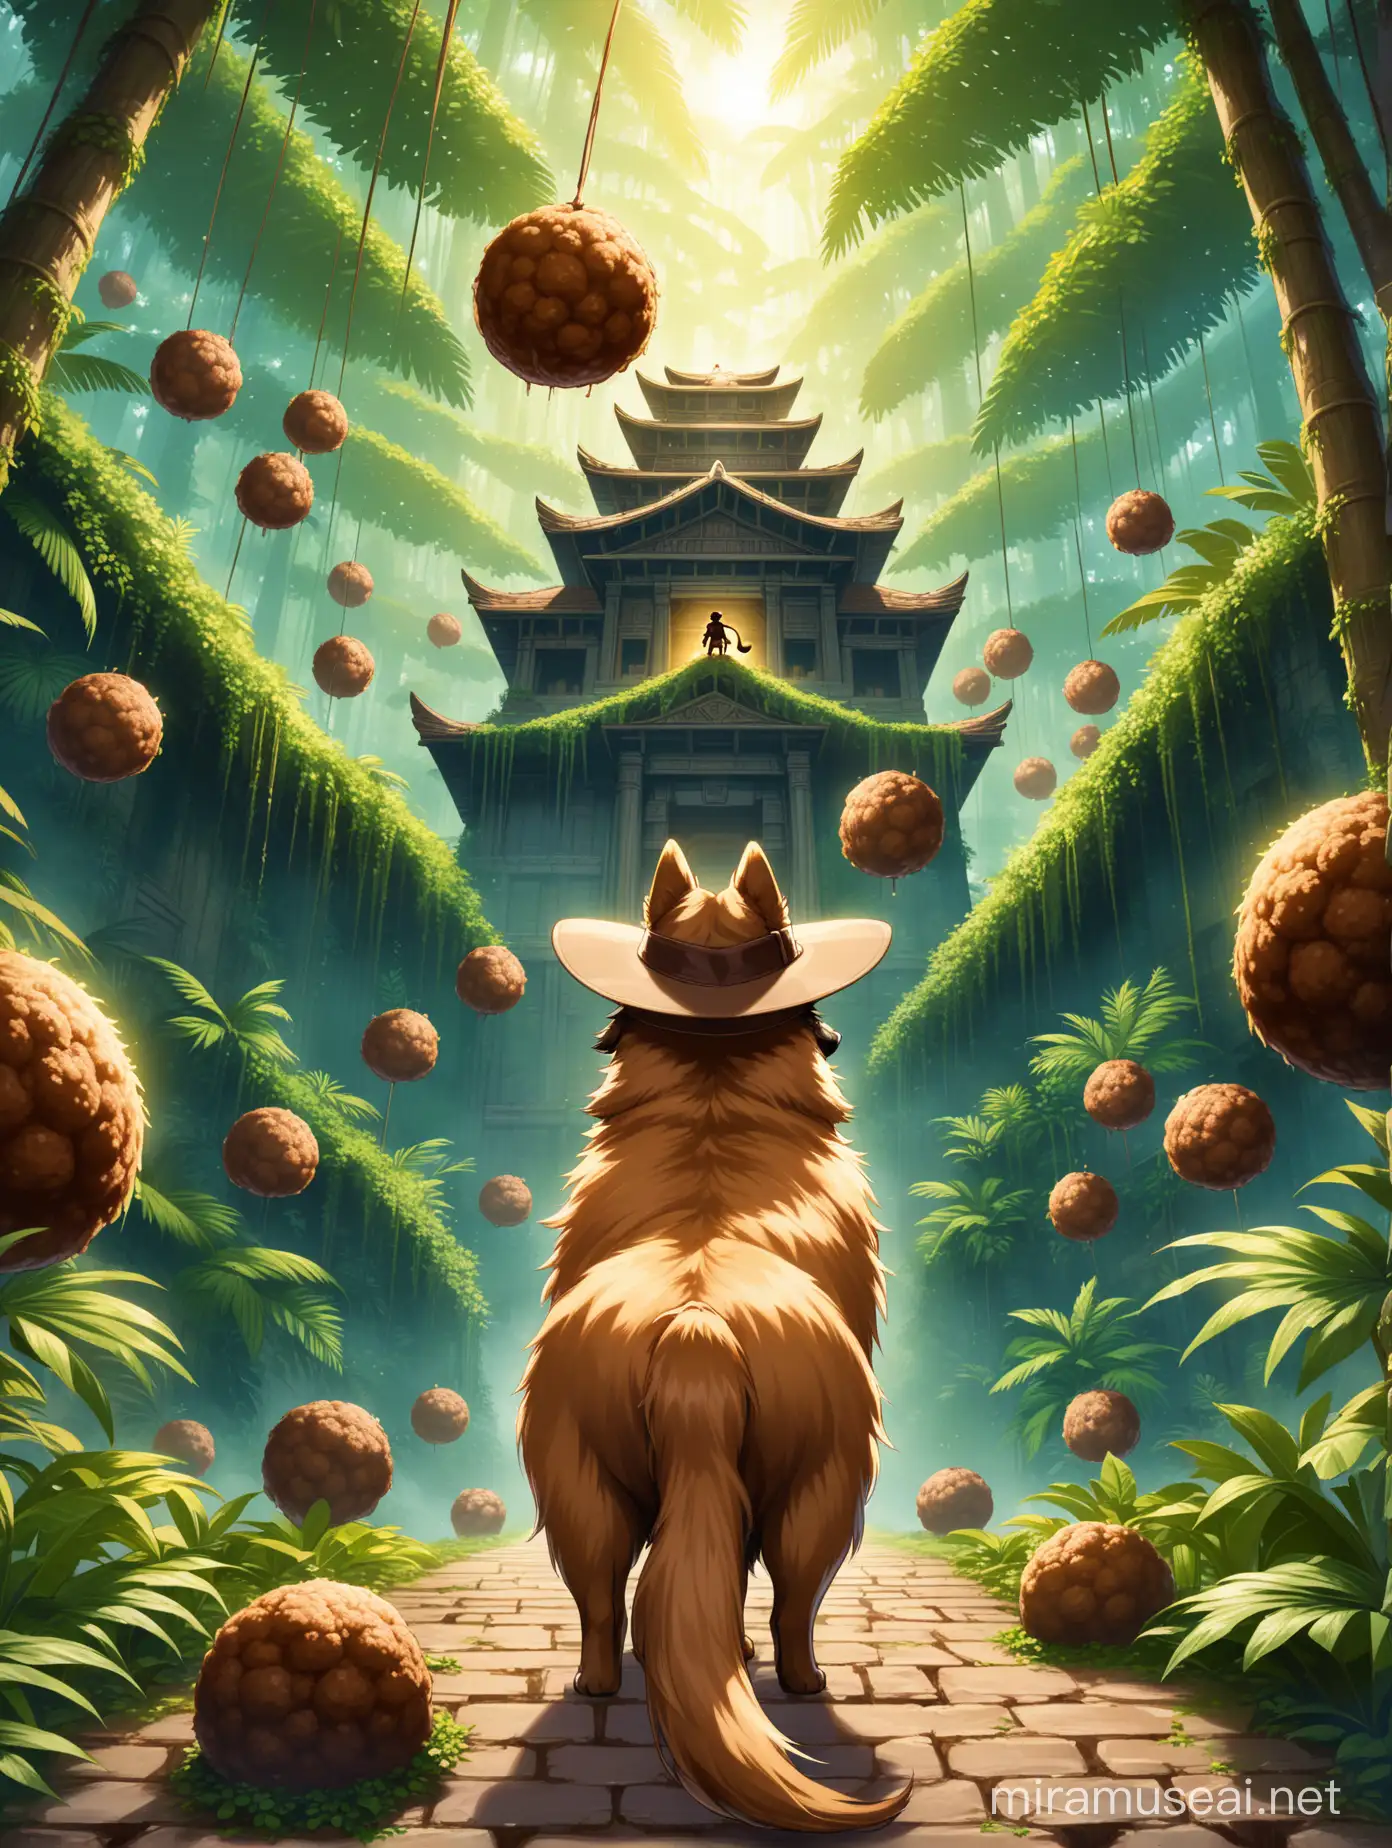 make them temple more dilapidated in a rainforest with a big meatball on the roof, a Belgian Tervuren in a Indiana jones inspired hat has its back to the camera and is looking up at the temple with tail wagging. there is meatballs all over the place. its magic 
